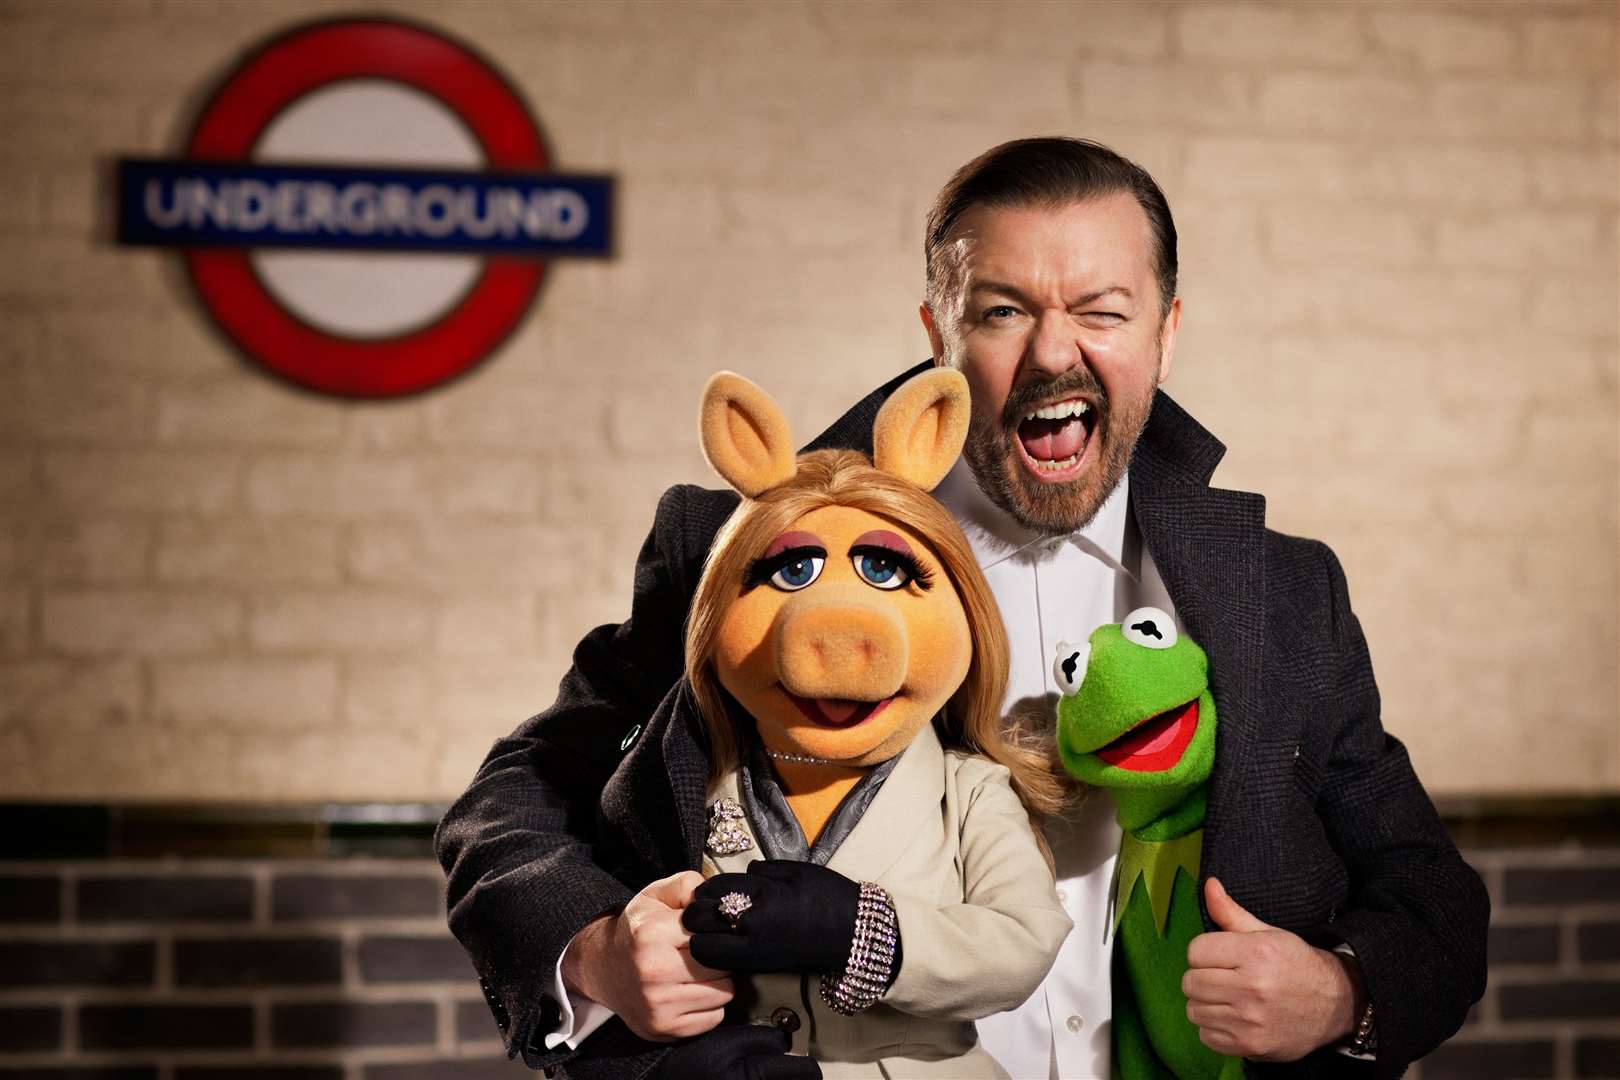 Ricky Gervais as Dominic Badguy and Miss Piggy (voiced by Eric Jacobson), in Muppets Most Wanted. Picture: PA Photo/2013 Disney Enterprises, Inc